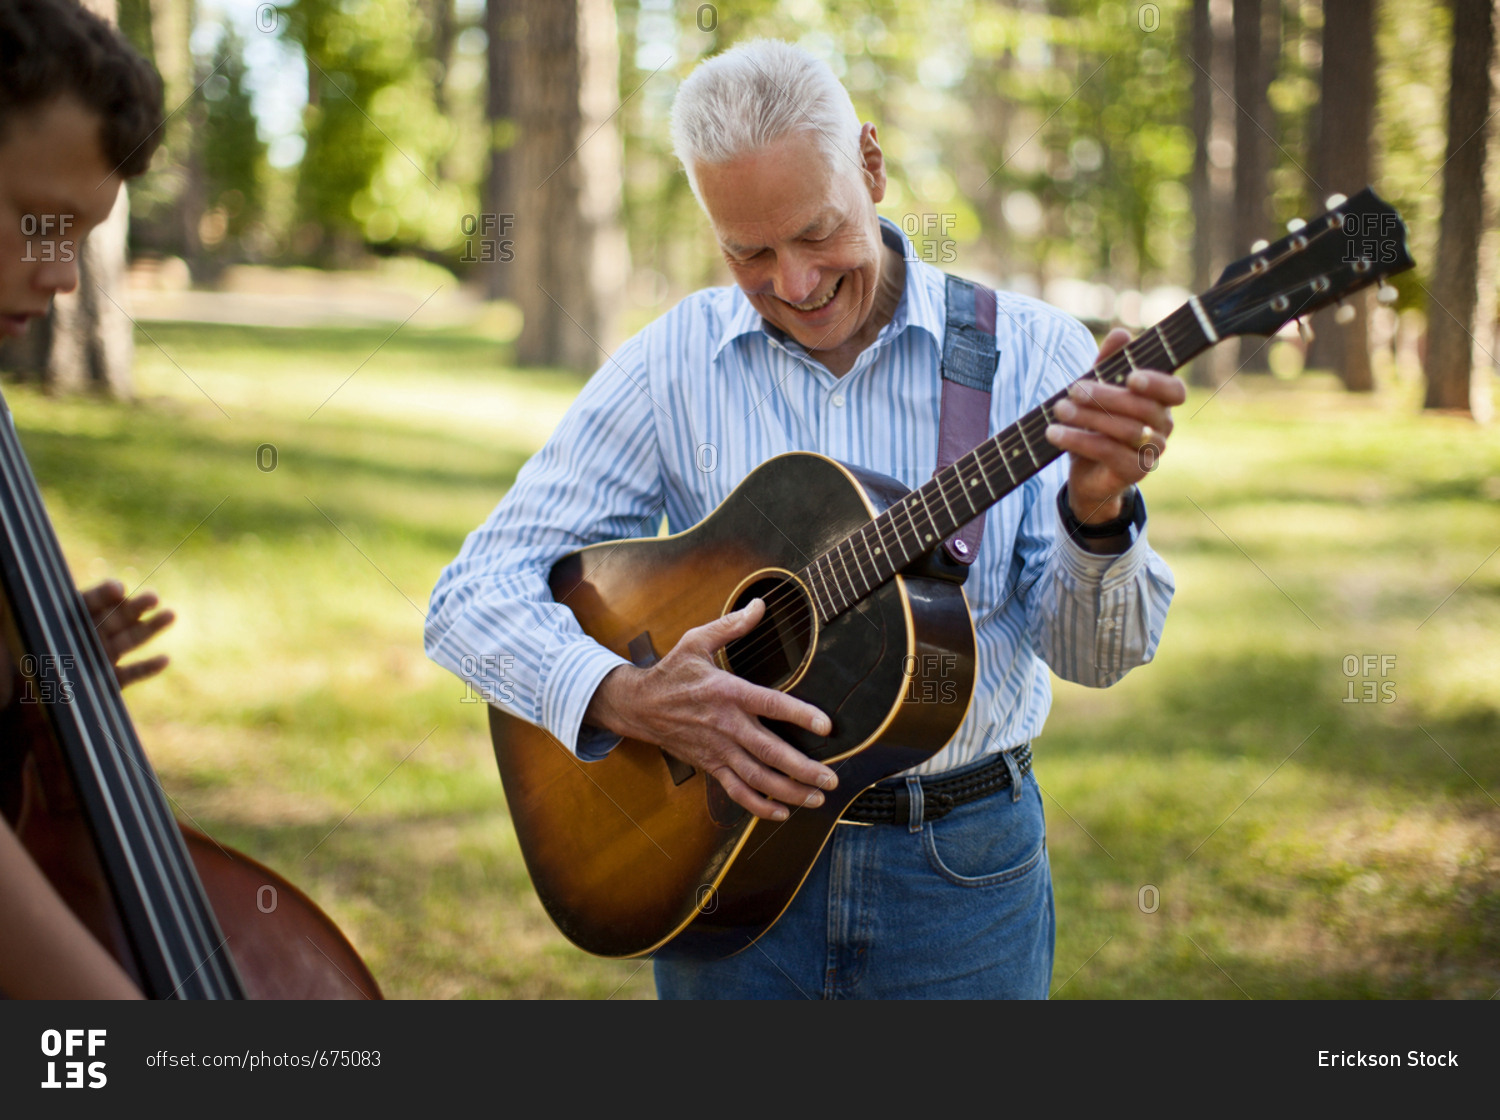 Smiling senior man playing an acoustic guitar while his grandson plays a double bass in a forest.